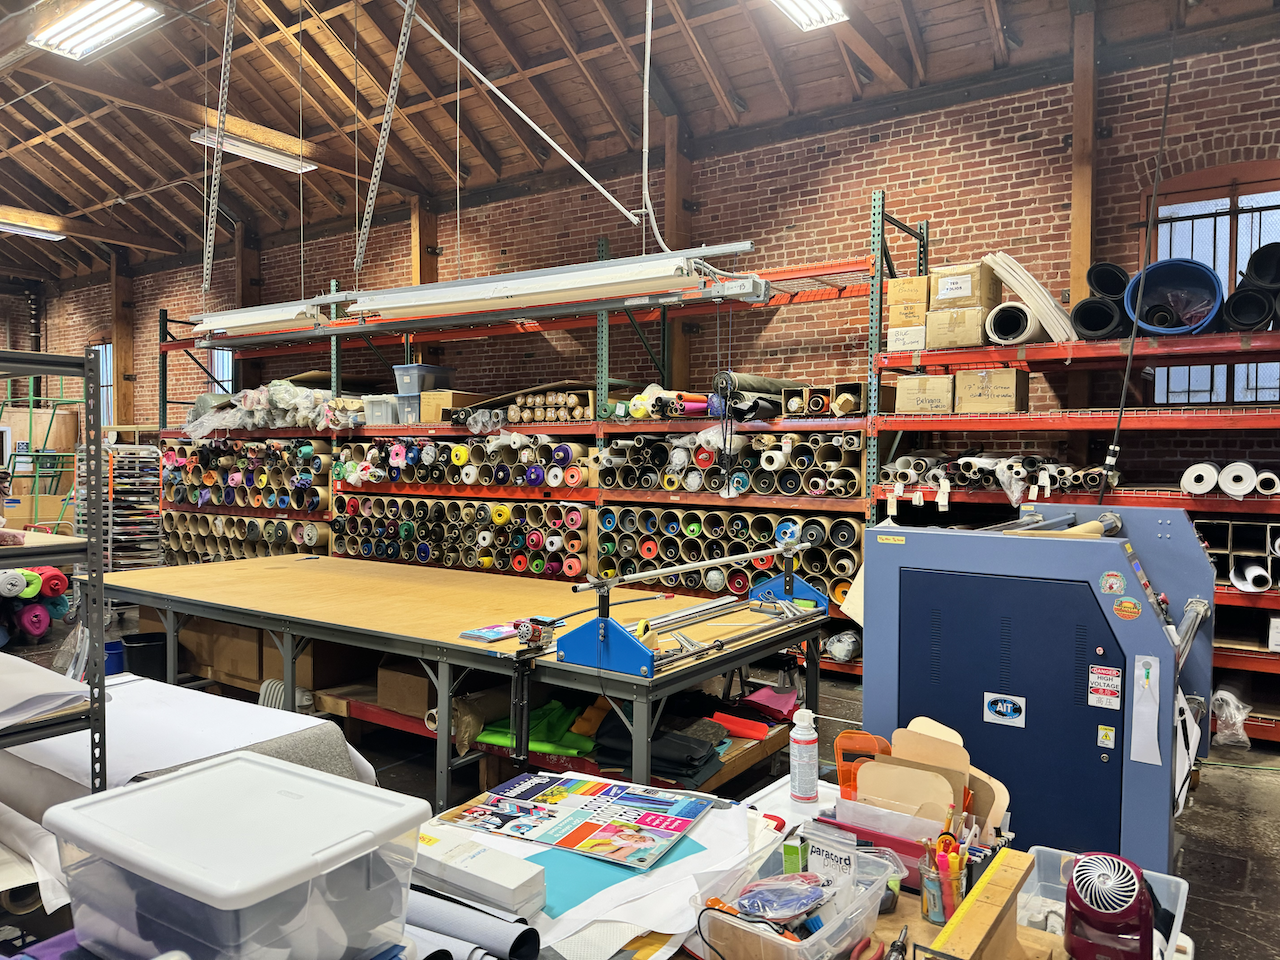  A shot of the big production table at the back of the Rickshaw Bagworks factory in the Dogpatch neigbhorhood of San Franciso. 